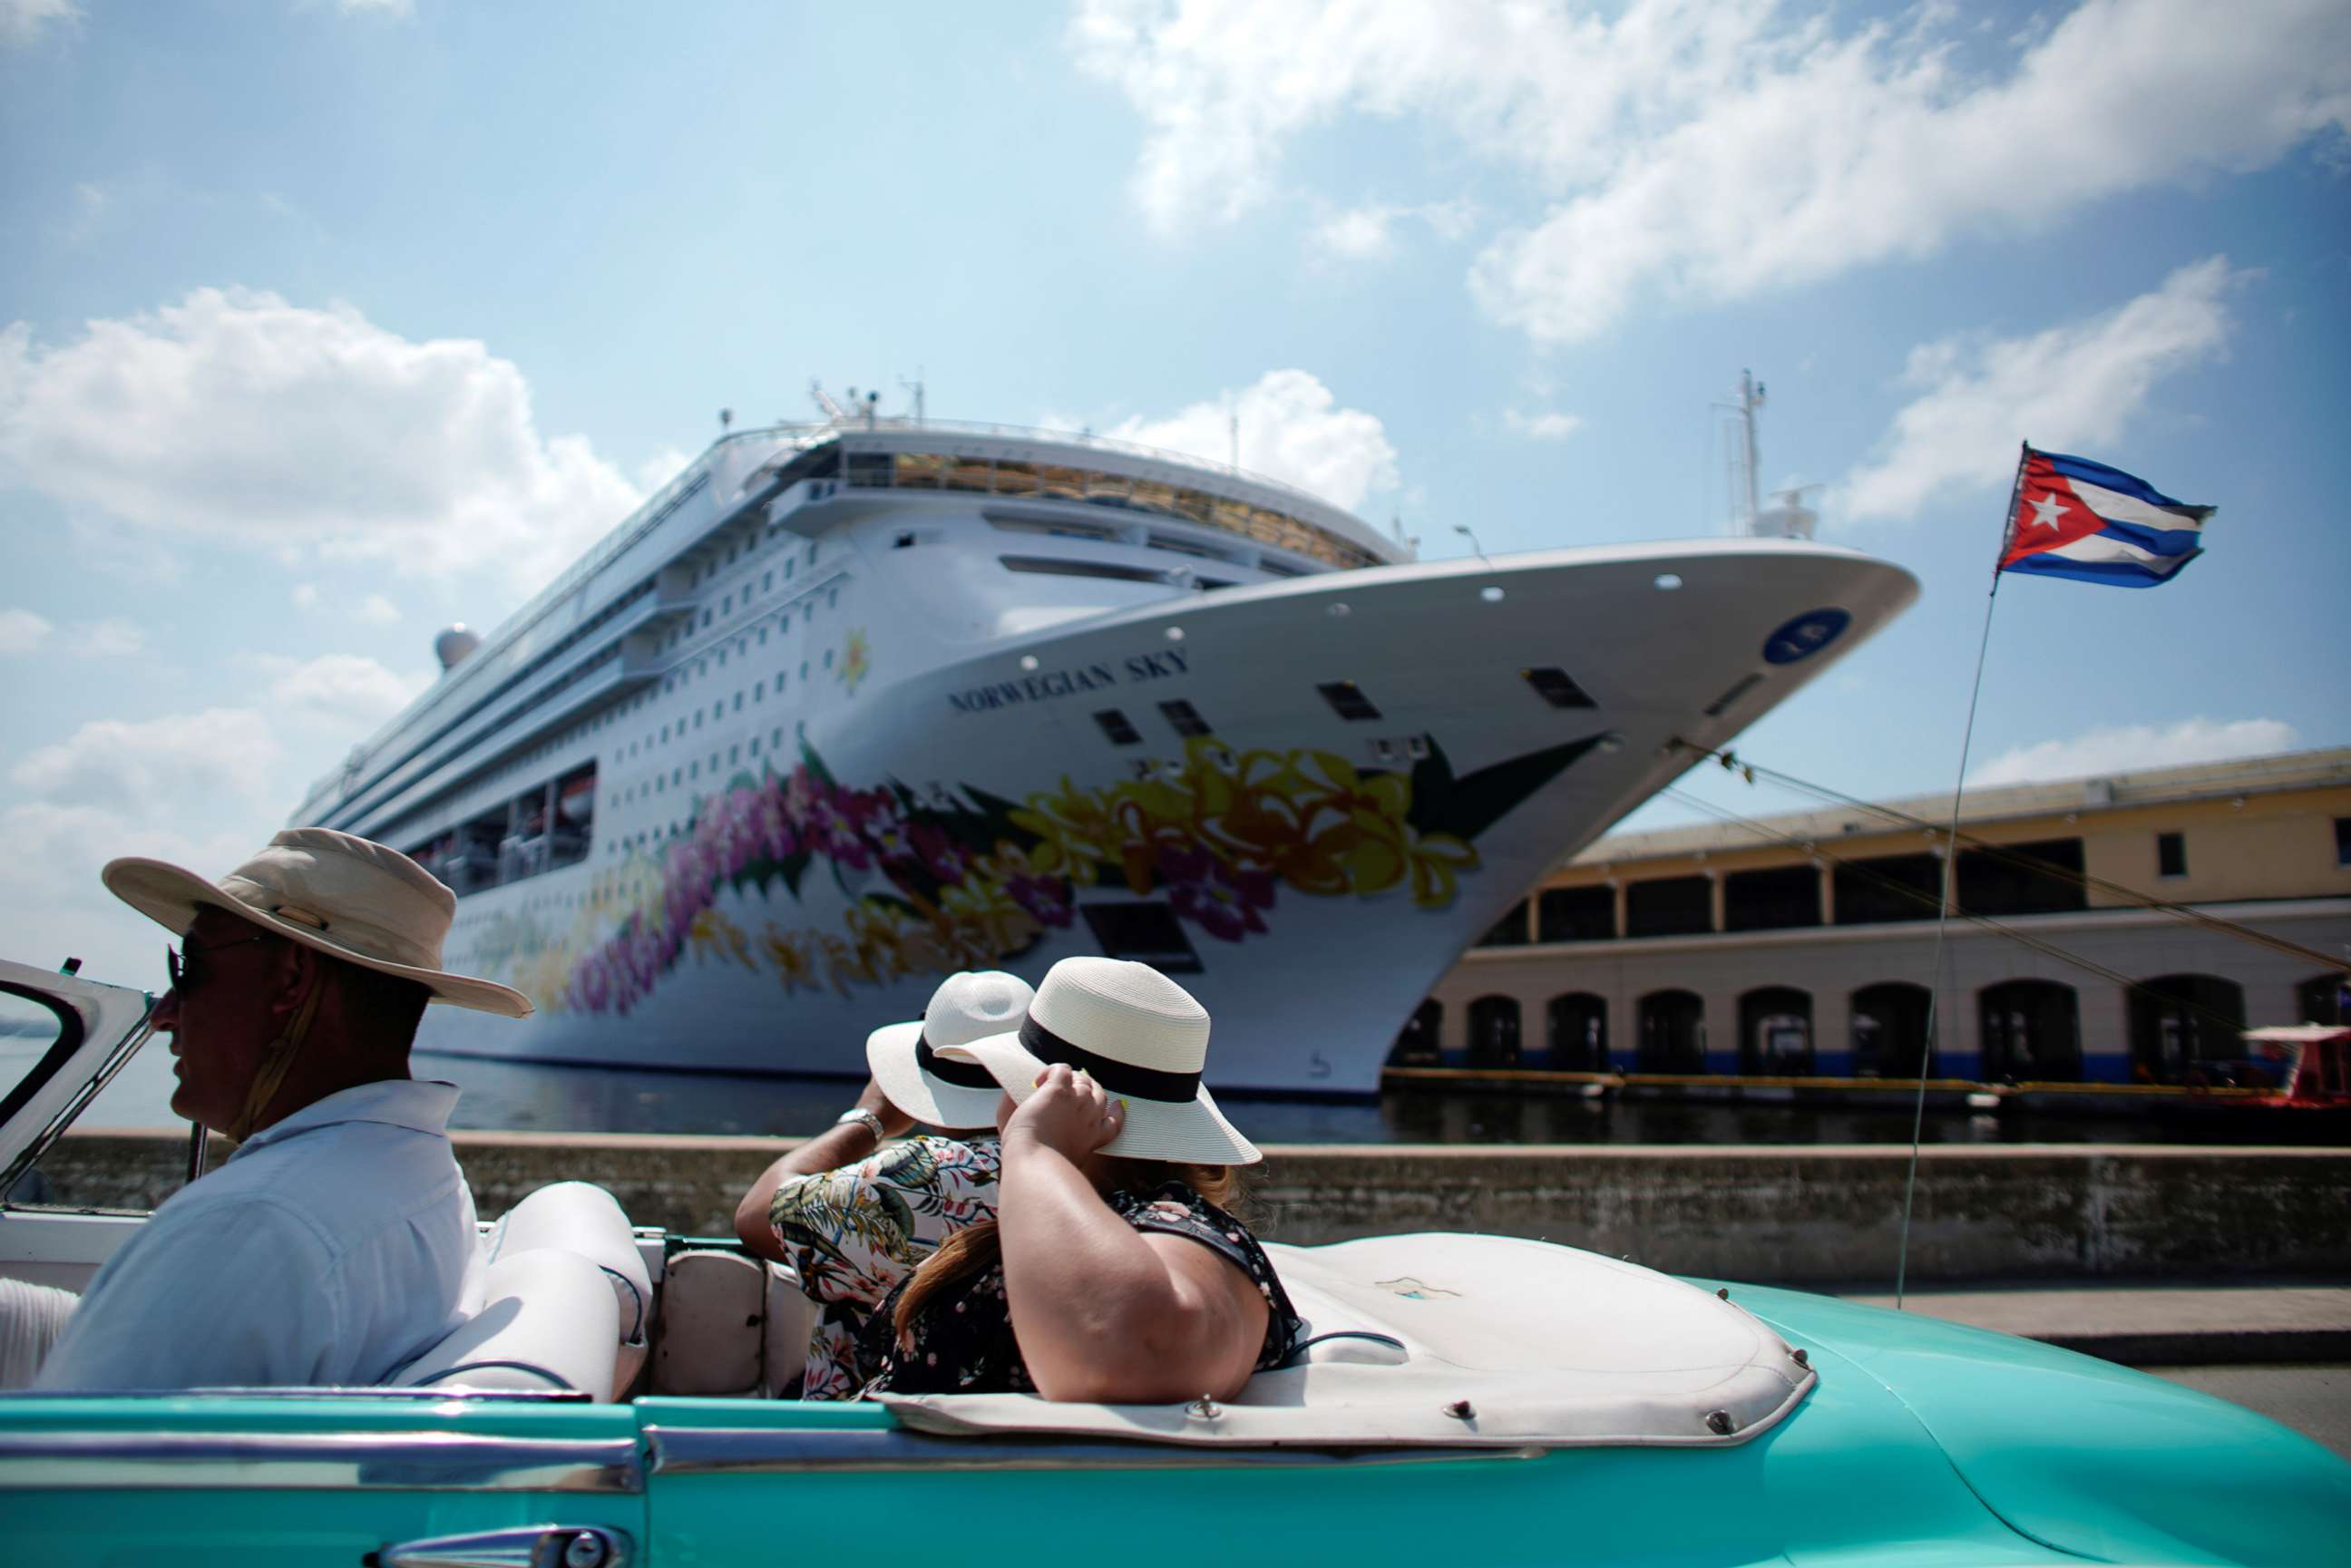 PHOTO: Tourists ride inside a vintage car as they pass by the Norwegian Sky cruise ship in Havana, Cuba, May 7, 2019.